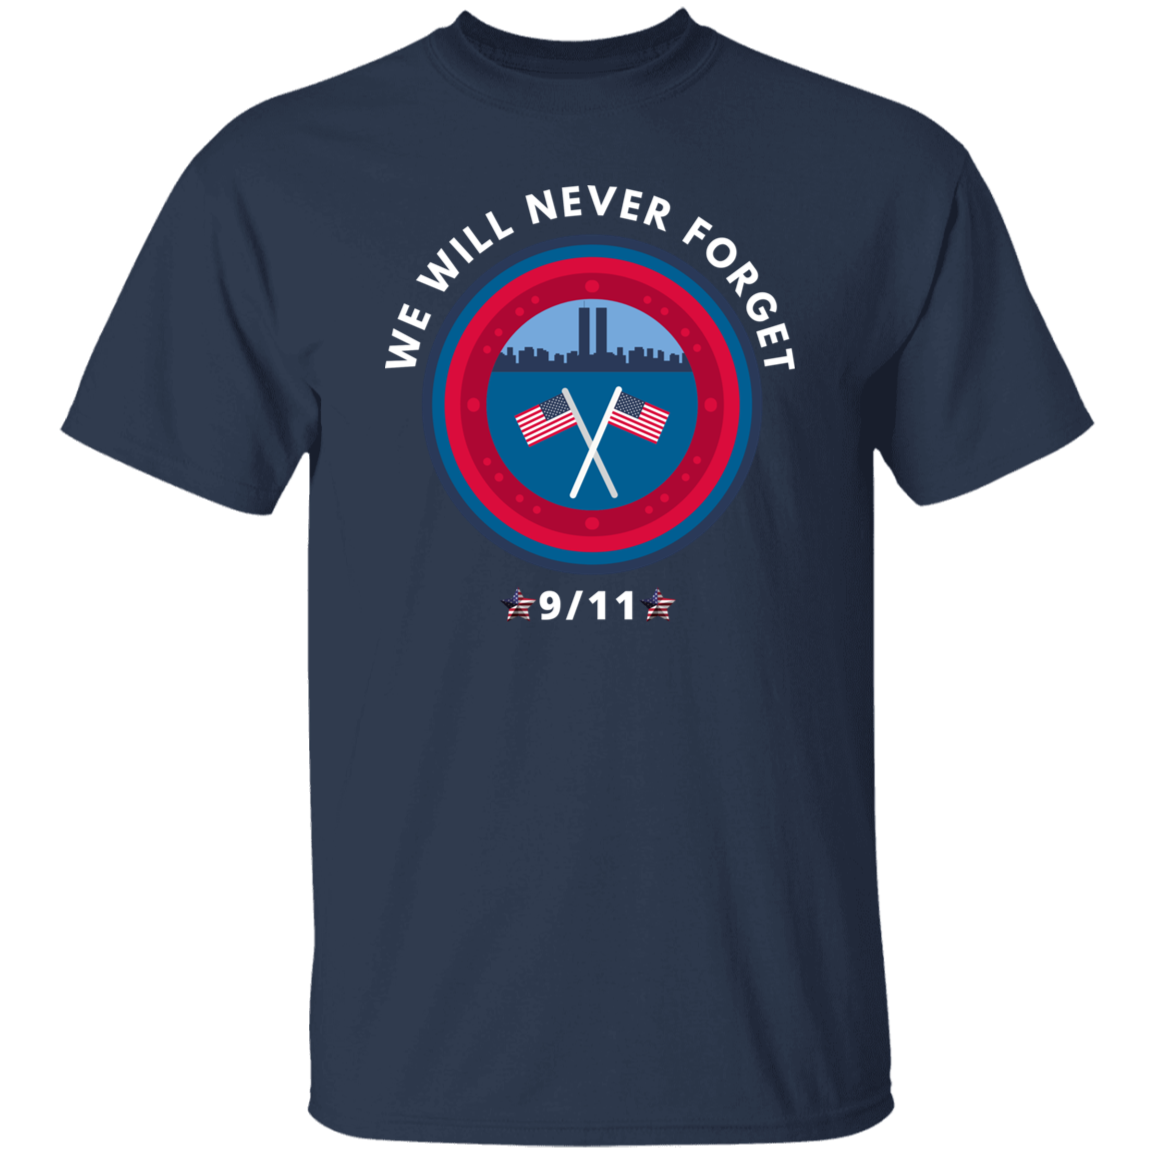 NEVER FORGET AMERICAN FLAG UNISEX   T-Shirt